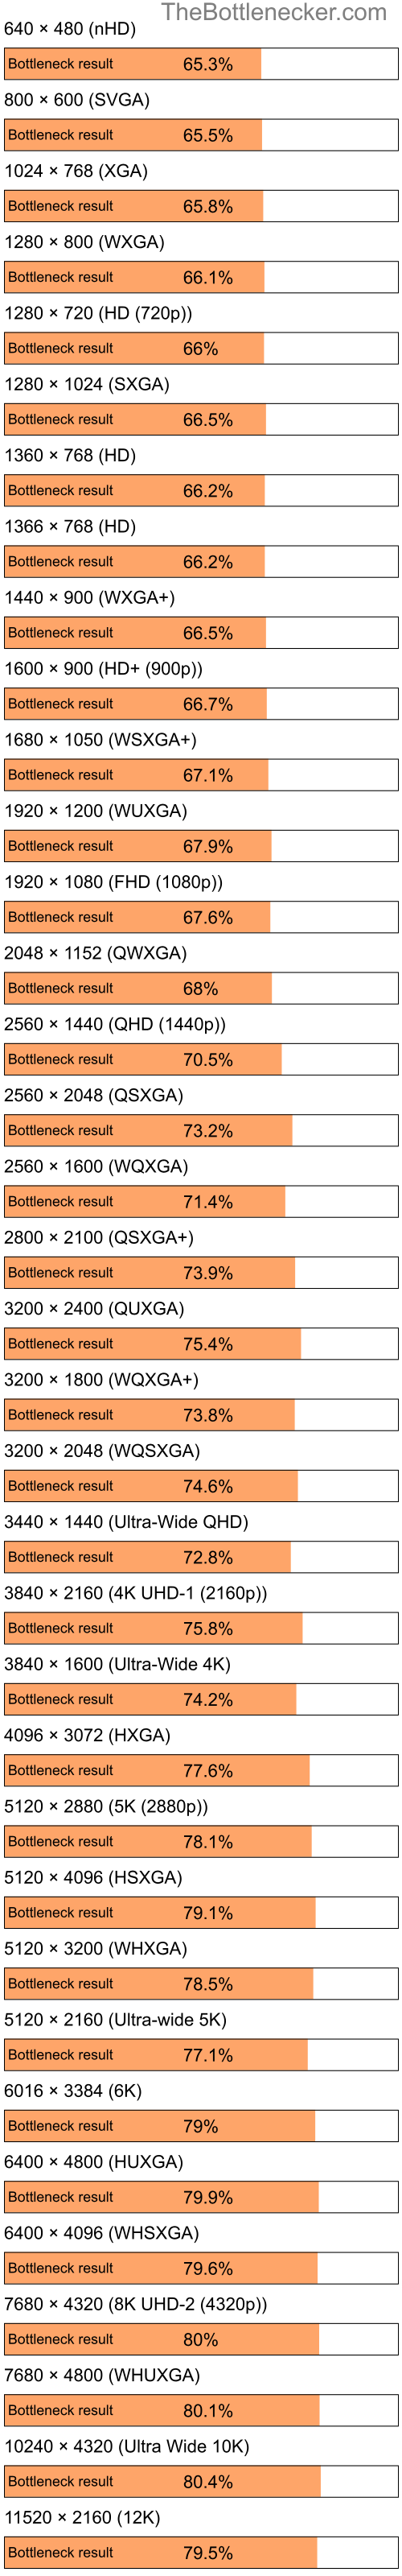 Bottleneck results by resolution for Intel Pentium 4 and AMD Mobility Radeon X1350 in Processor Intense Tasks